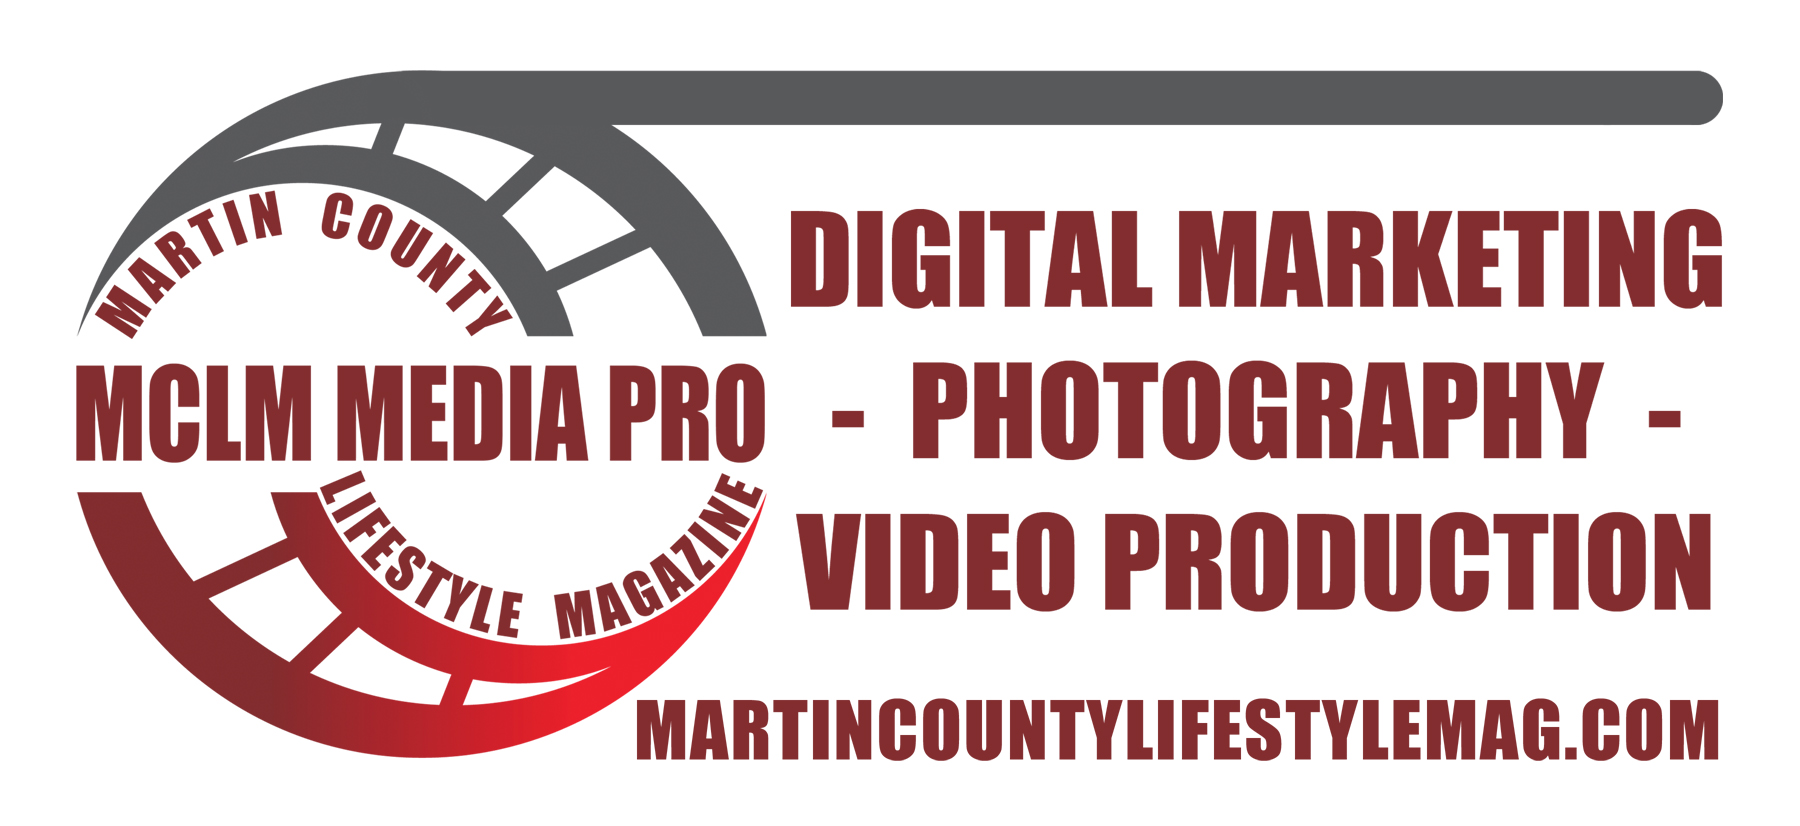 Located in Stuart, Florida, Martin County Lifestyle Magazine - MCLM Media Pro is a full-service social media marketing agency that offers social media content creation and management, social media advertising, and SEO (search engine optimization) services. Since 2012, we have been covering our local businesses and organizations on the Treasure Coast and providing digital marketing services that also include professional photography, video production, graphic design, and website building, aiming to help companies increase their online visibility, website traffic, and sales through social media marketing and content marketing. We are budget-friendly, and we mostly work with small businesses, helping them adapt and grow their brand online.